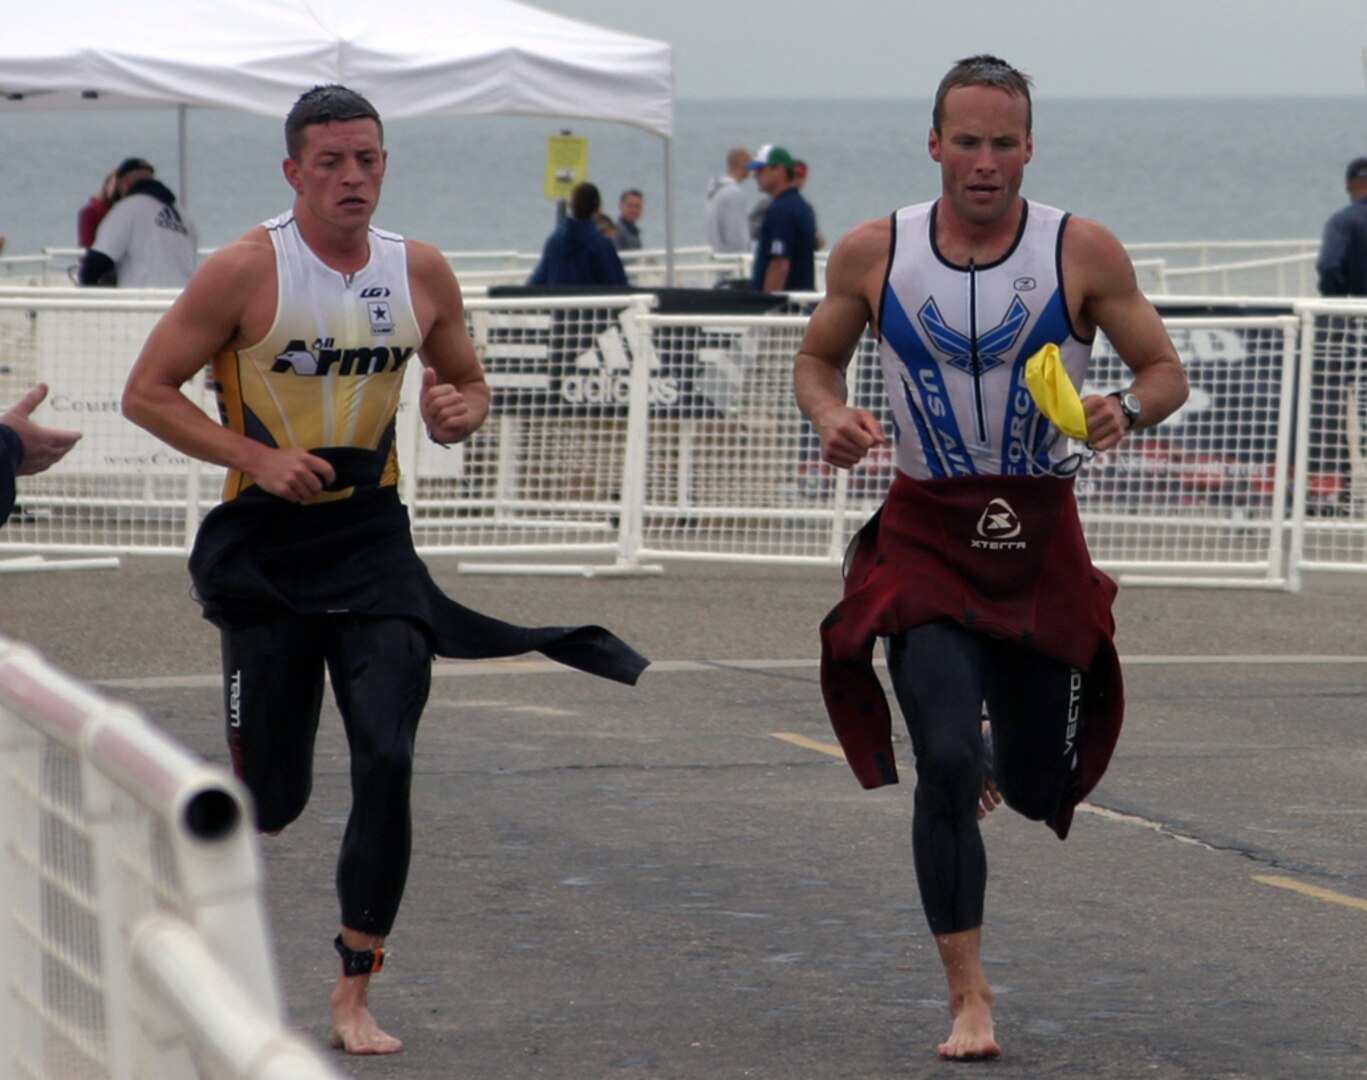 May 30, 2009 - Air Force triathlete James Bales (right) transitions from the 1,500-meter swim to thet 40K bike ride at the Armed Forces Triathlon in Point Mugu, Calif., May 30. (U.S. Air Force photo/Tech. Sgt. Elisha Abercrombie) 